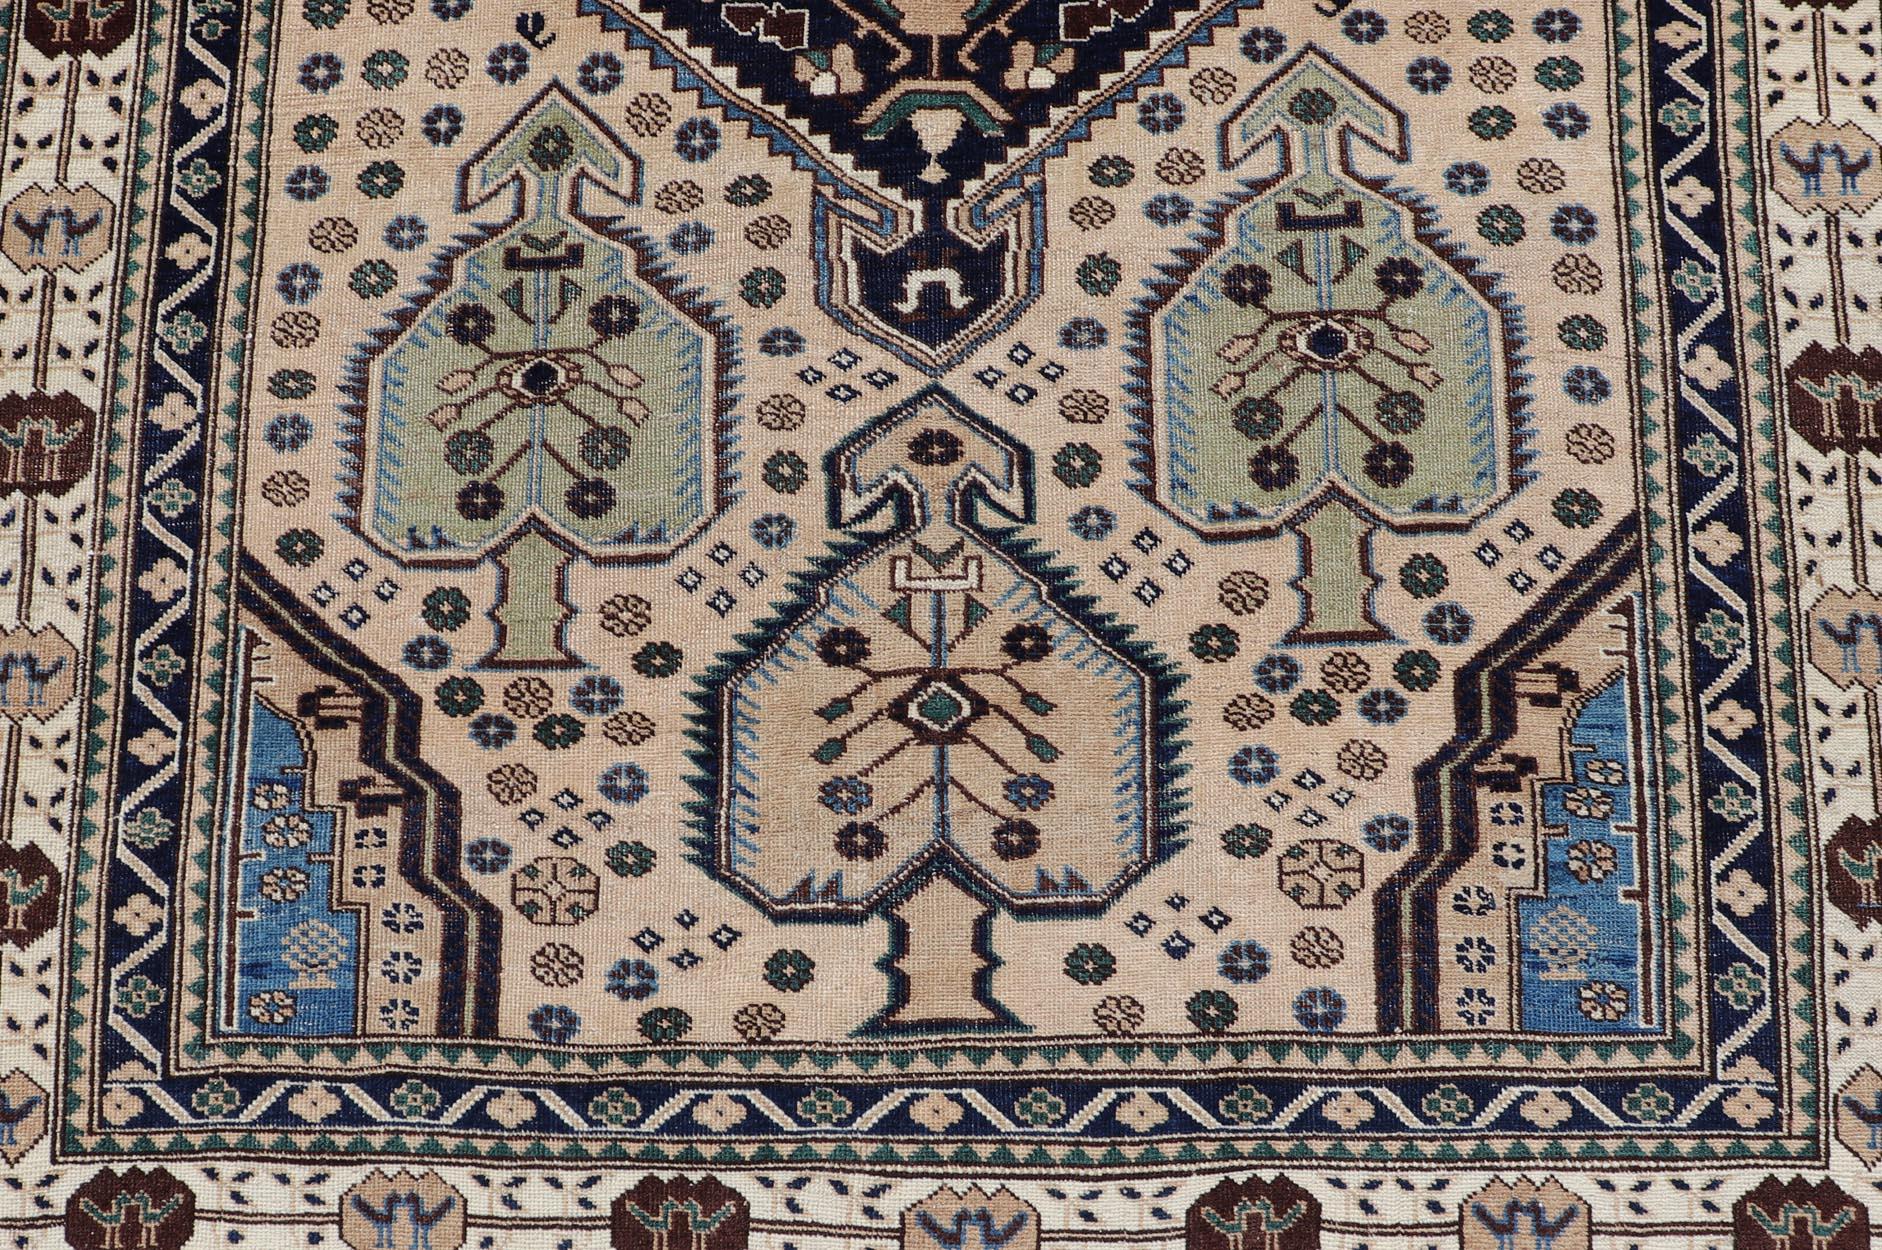 Antique Caucasian Shirvan Rug in Blue, Green, and Cream with Tribal Design. Keivan Woven Arts / rug EMB-22186-15067, country of origin / type: Caucasus / Kazak, circa late-19th Century.
Measures: 4'8 x 6'8 
The field of this Caucasian piece features